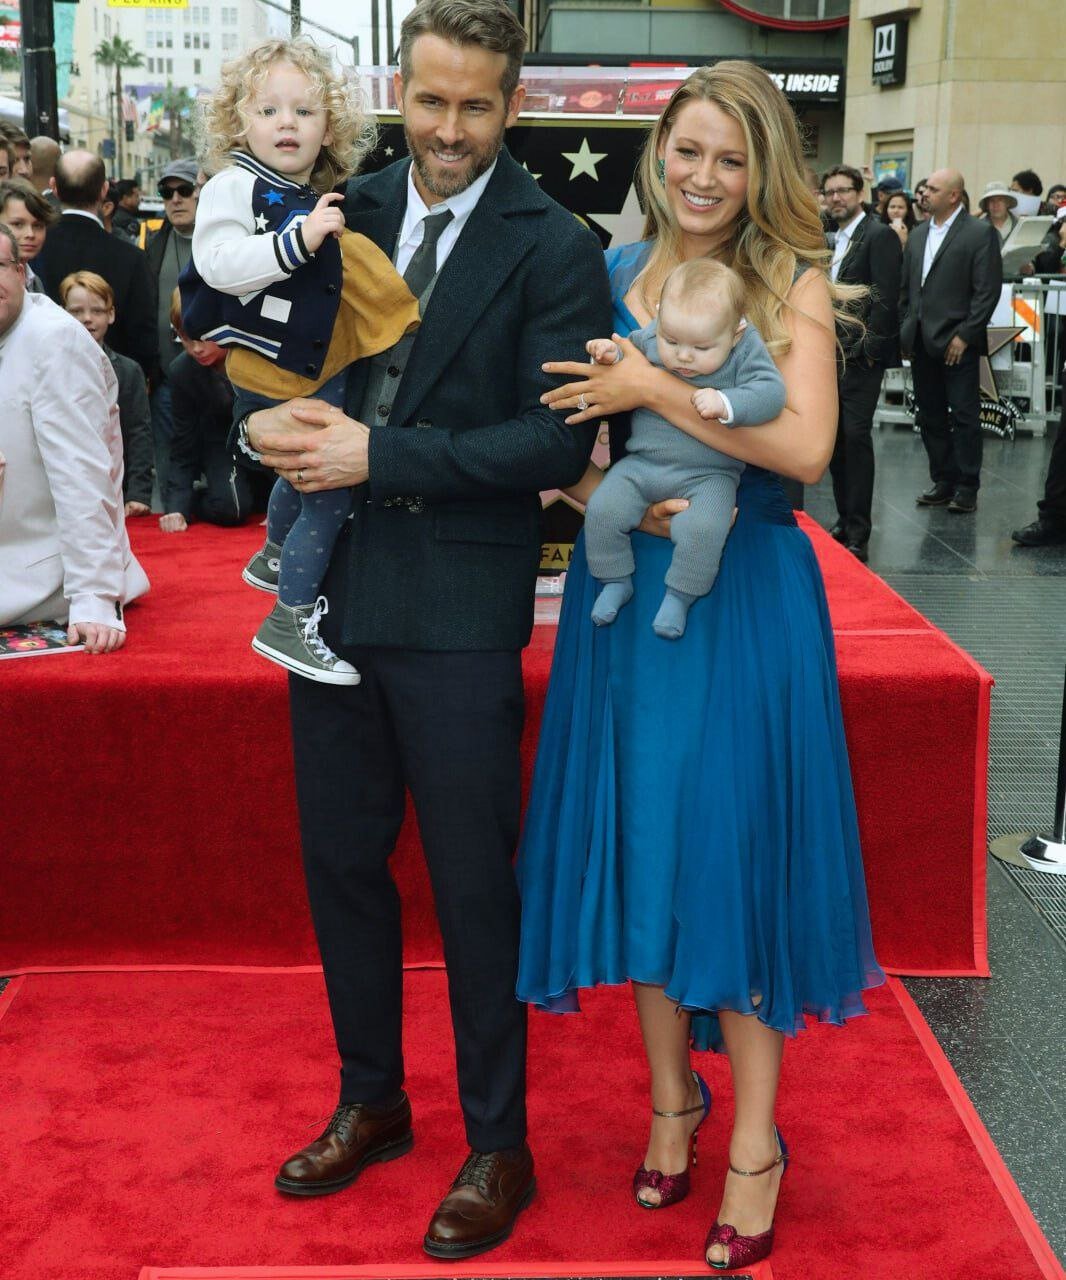 Ryan Reynolds and Blake Lively Reveal Name of Their New Baby